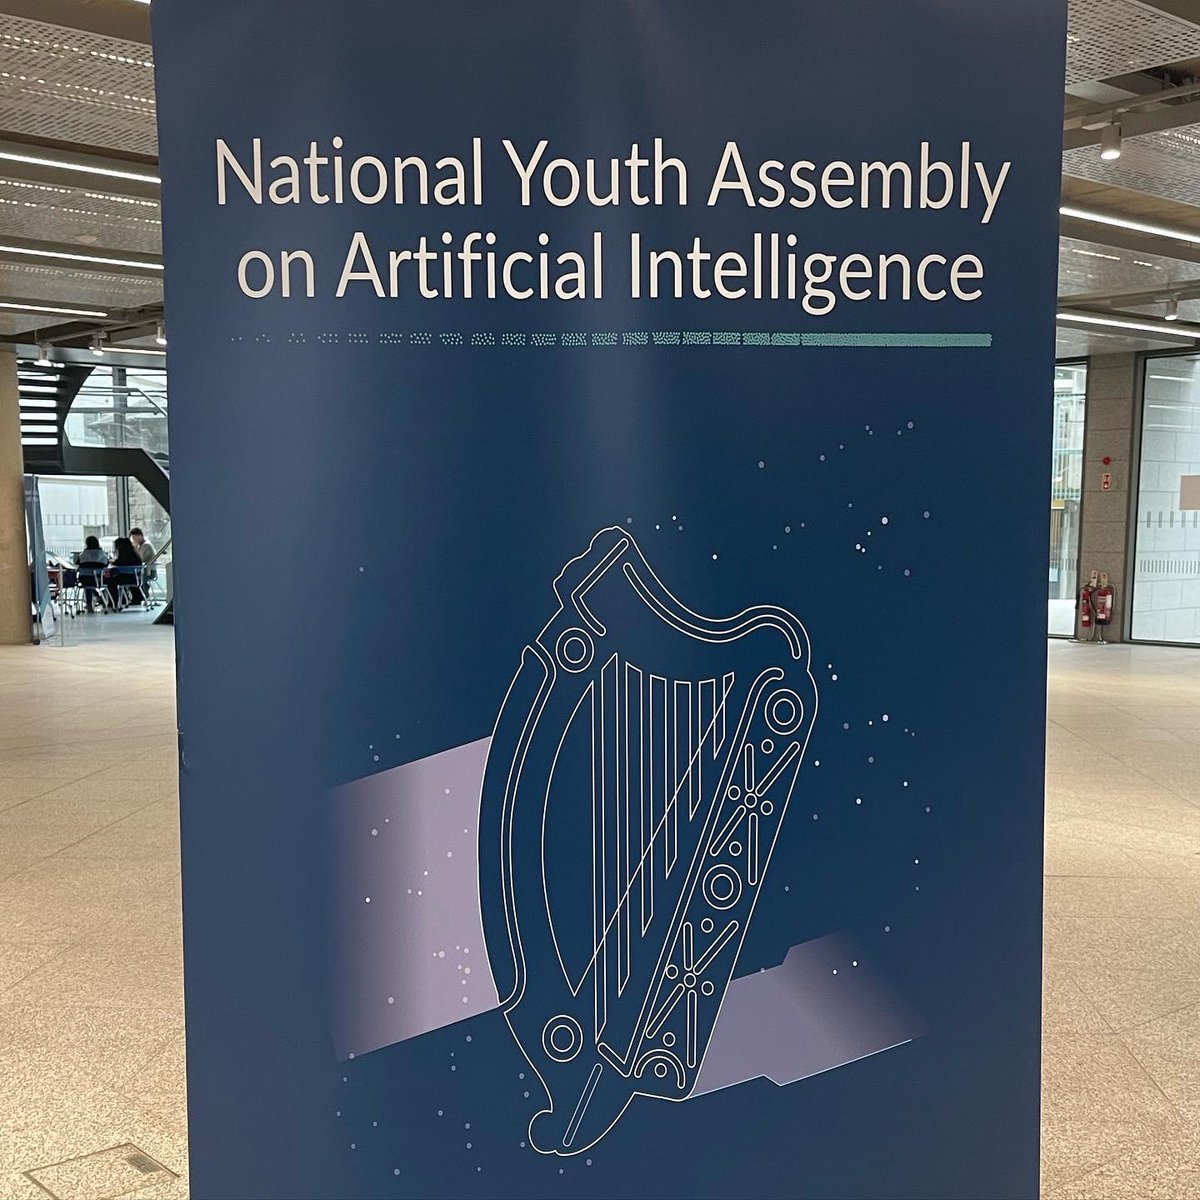 It’s a real honour to contribute to the National Youth Assembly on Artificial Intelligence today at Trinity College Dublin. #ArtificialIntelligence @TCDTangent @tcddublin @insight_centre @crt_ai @SEFSUCC @scienceirel @daracalleary